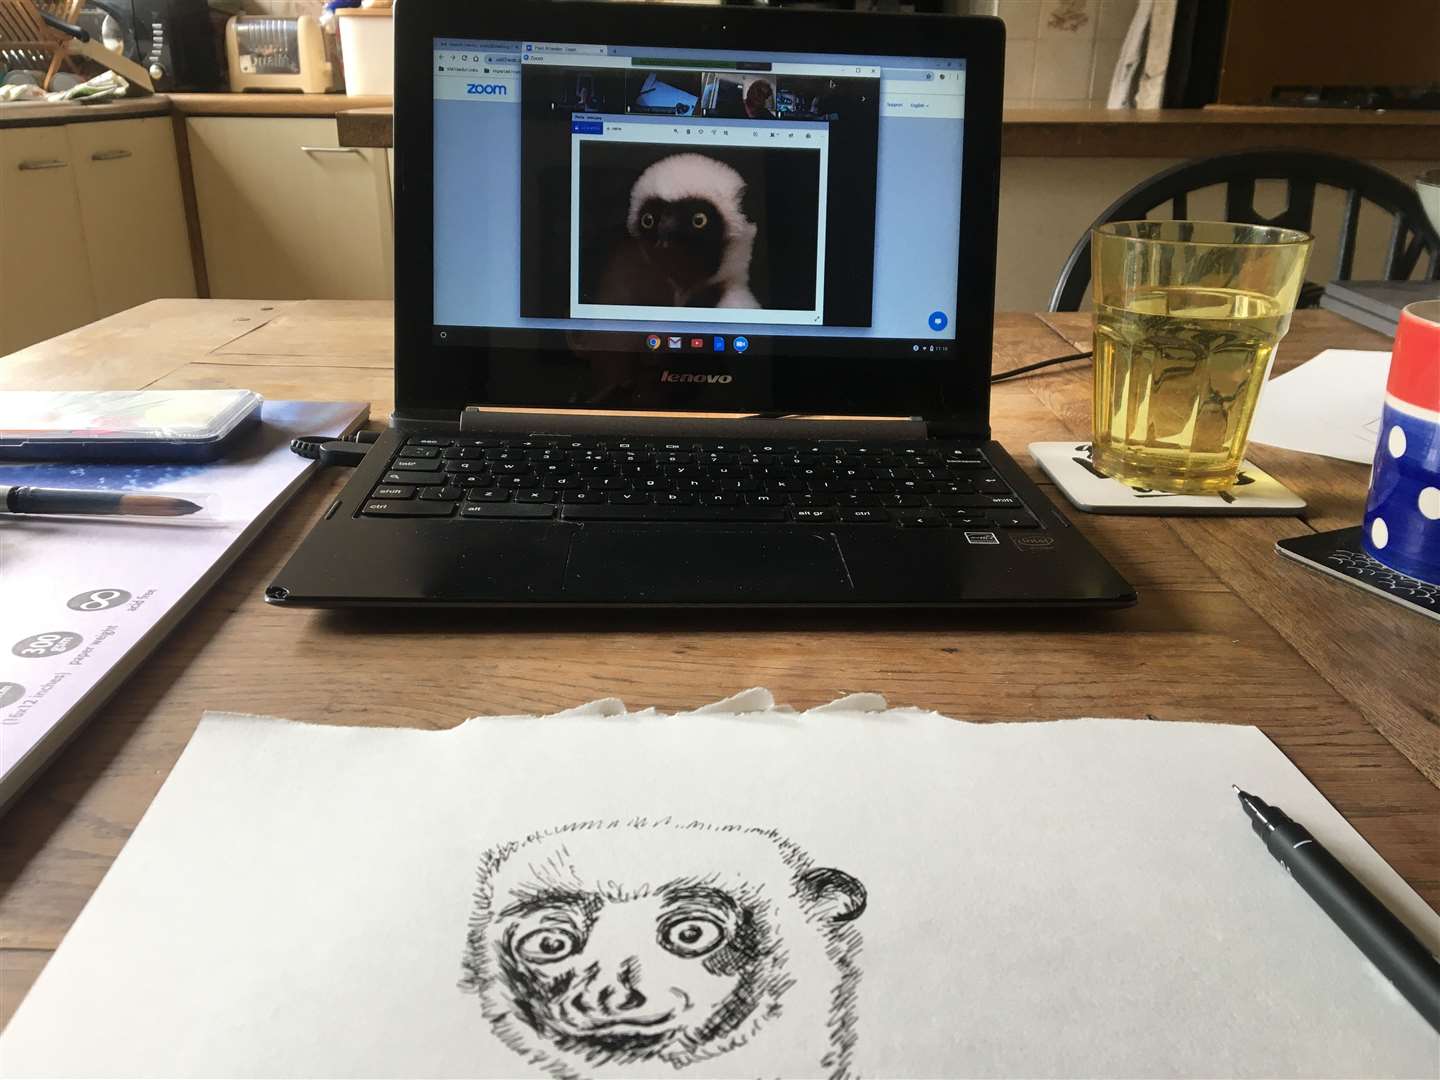 The lemur - how does it look?